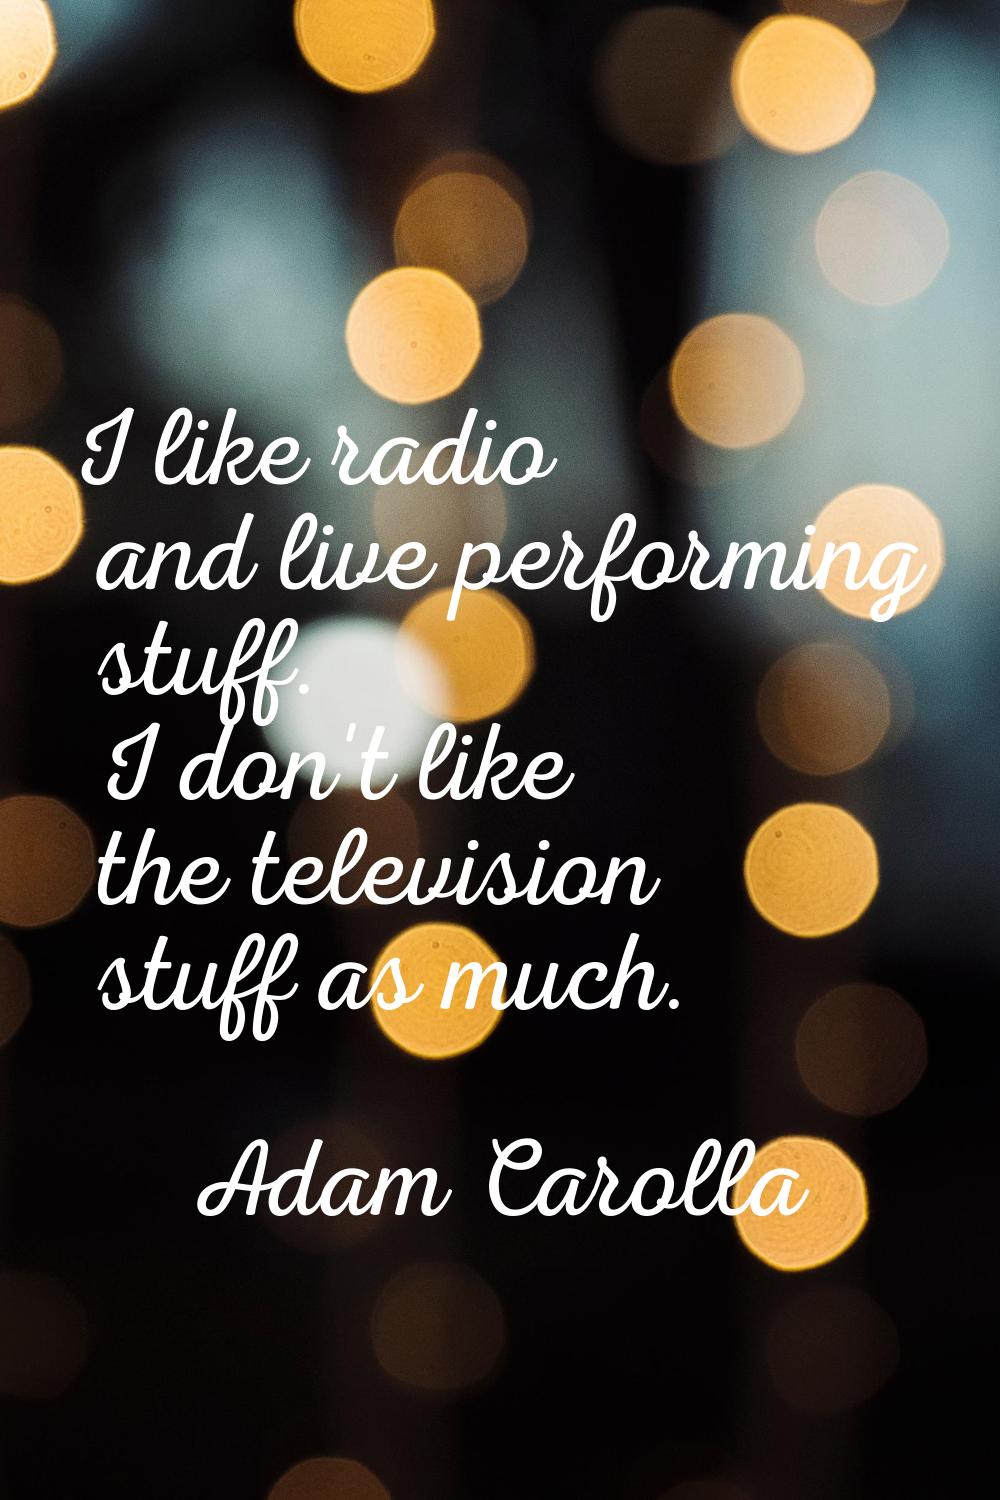 I like radio and live performing stuff. I don't like the television stuff as much.